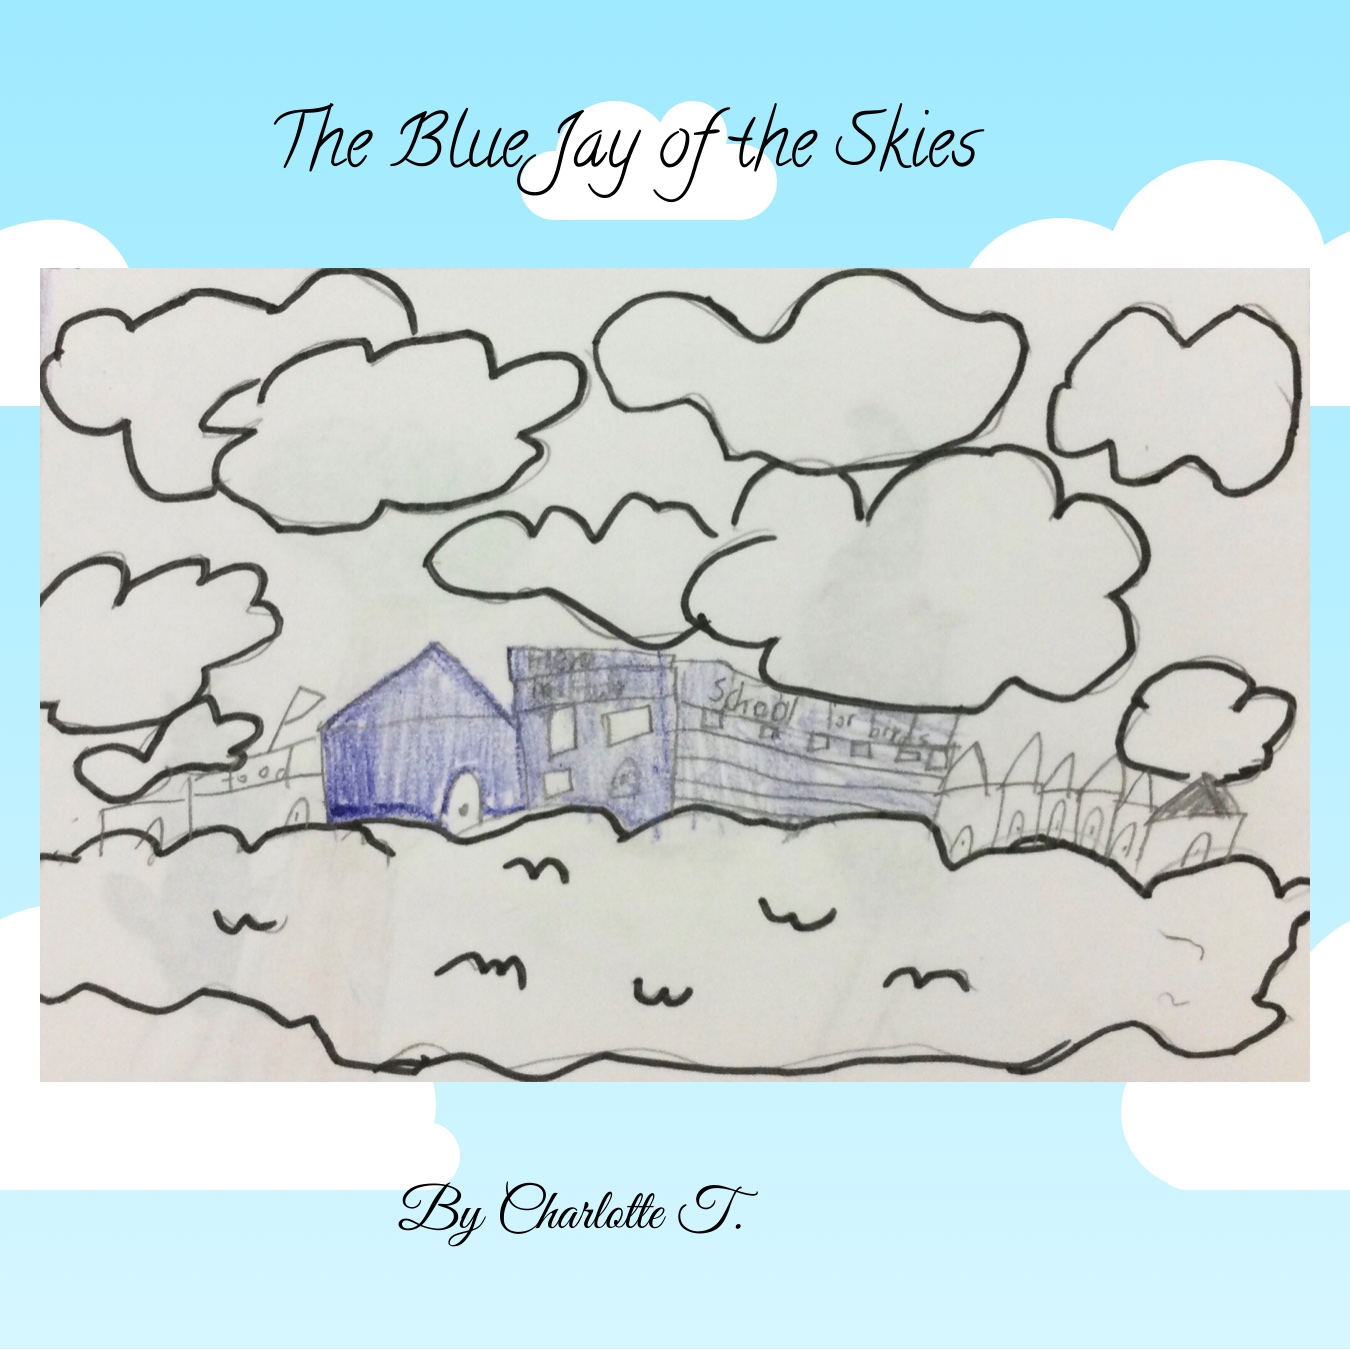 The Blue Jay of the Skies by Charlotte T